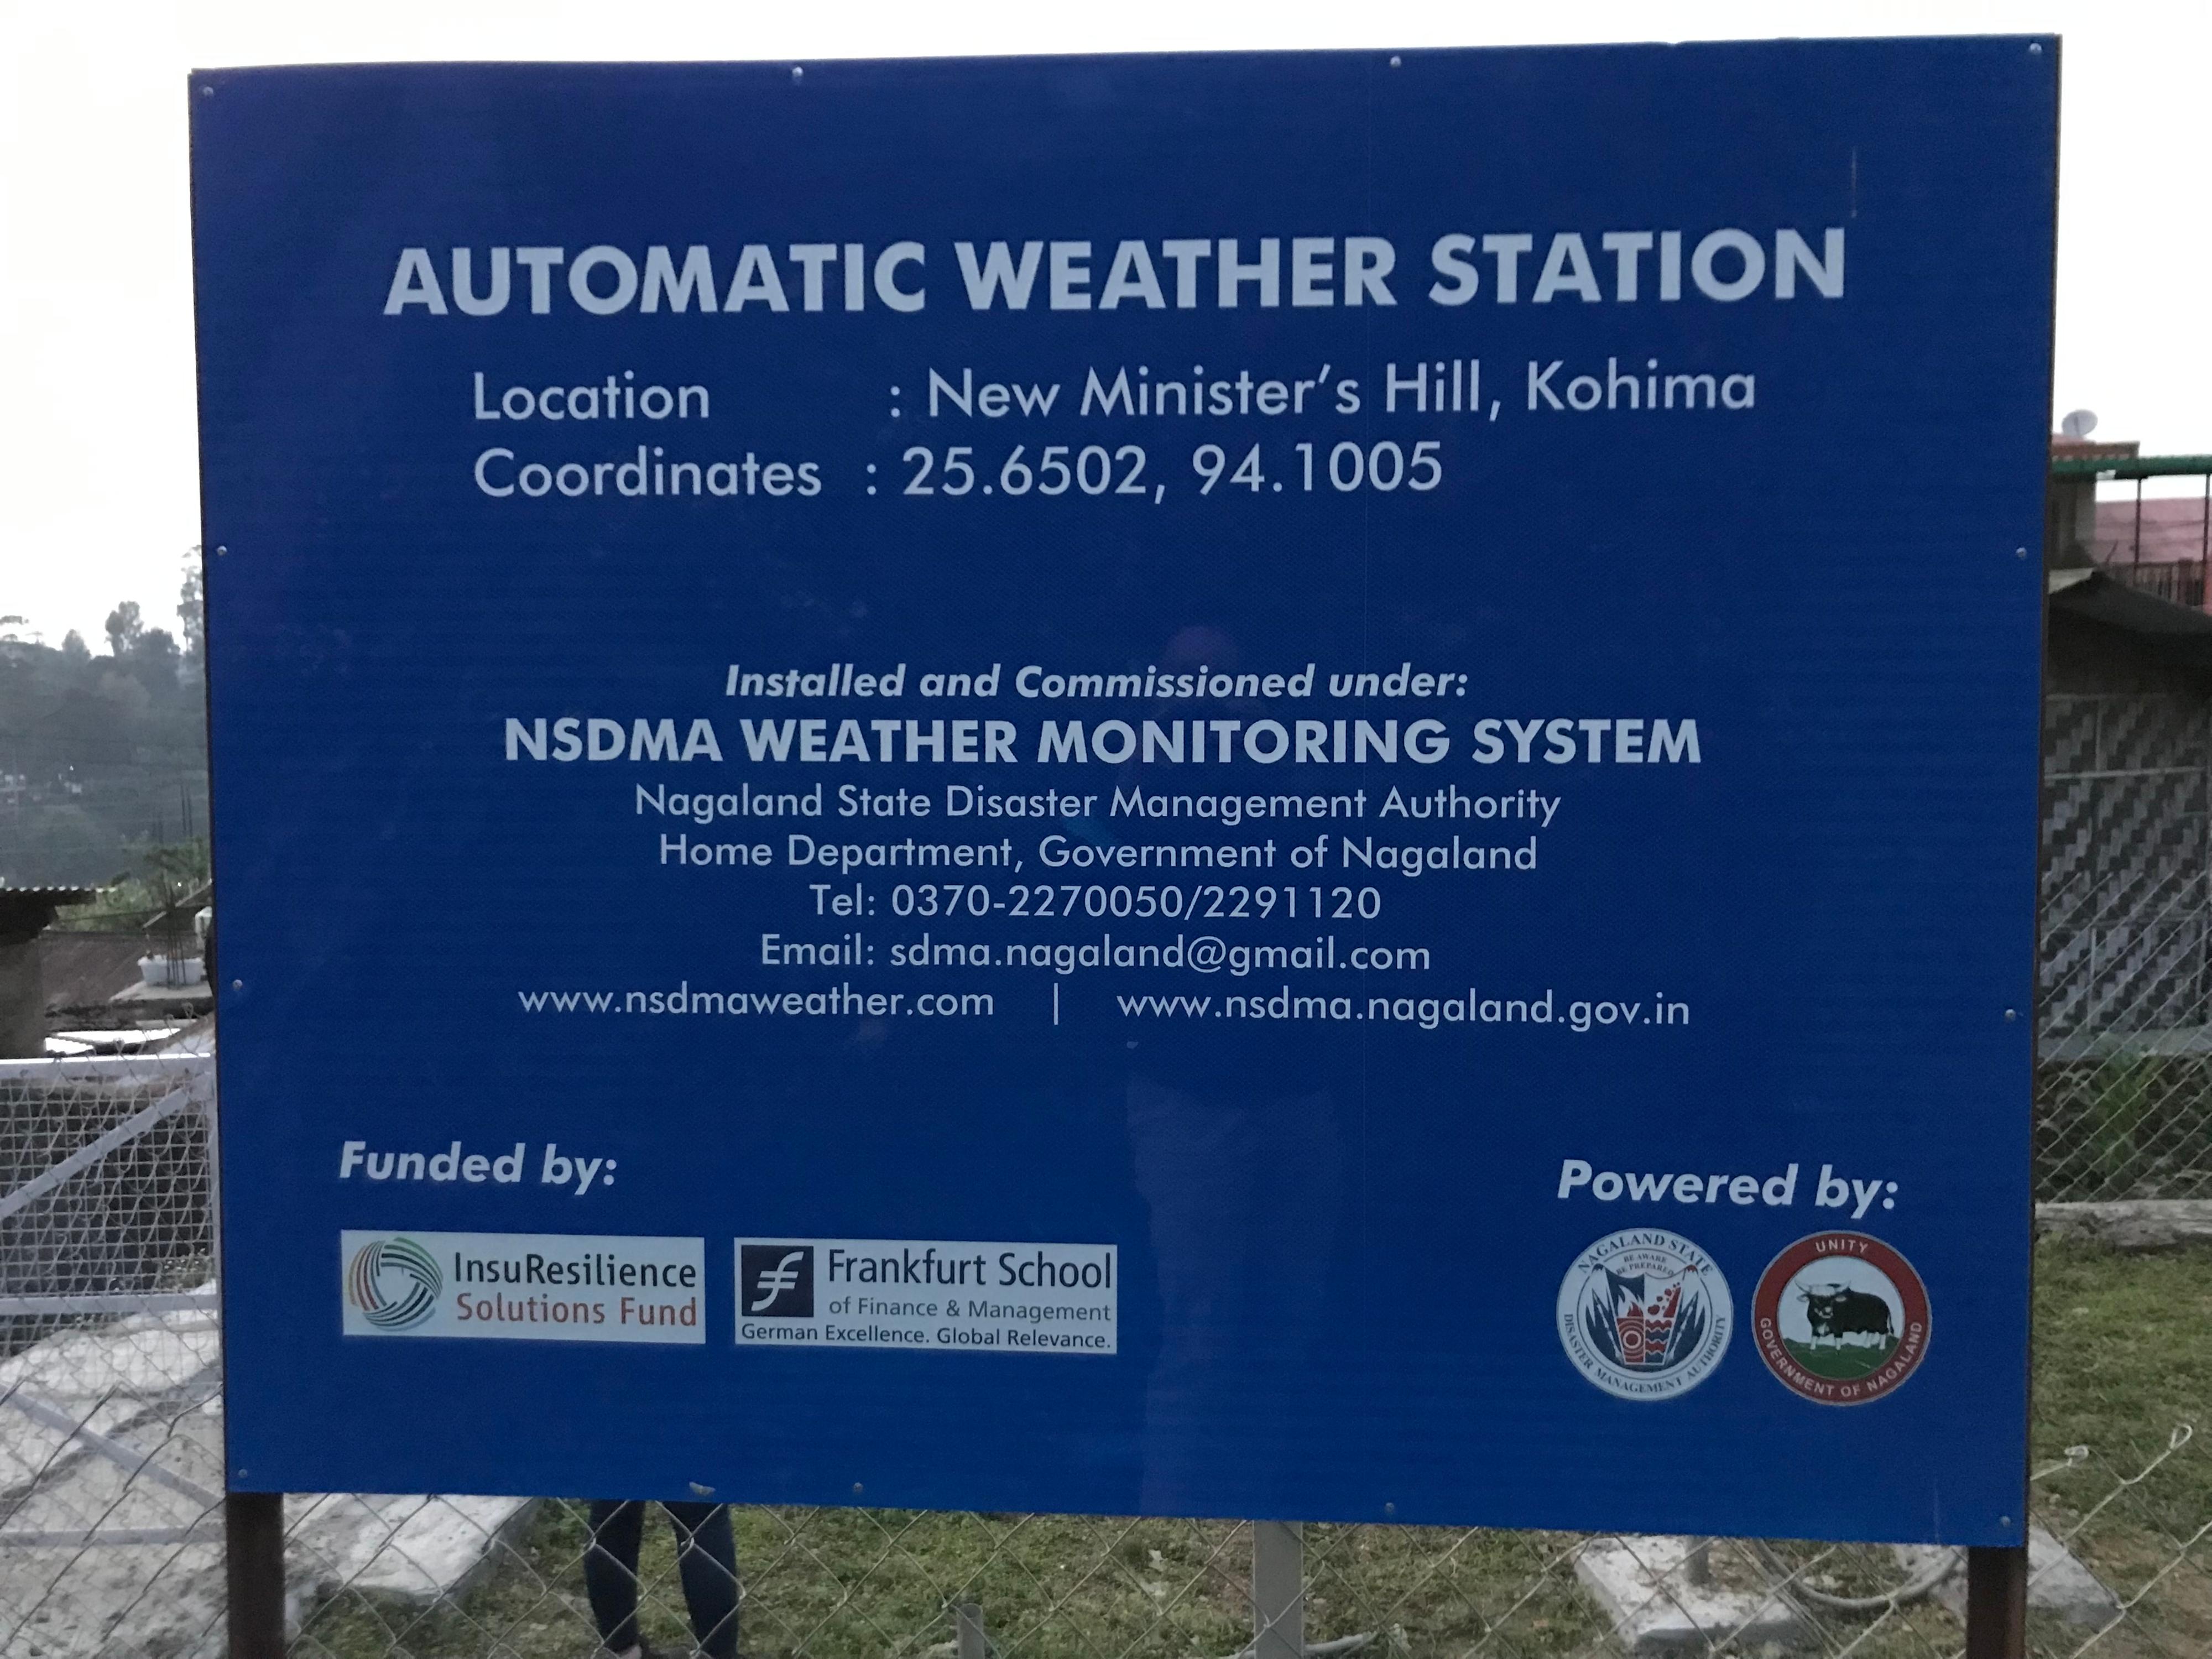 Signage of a weather station in Nagaland, India